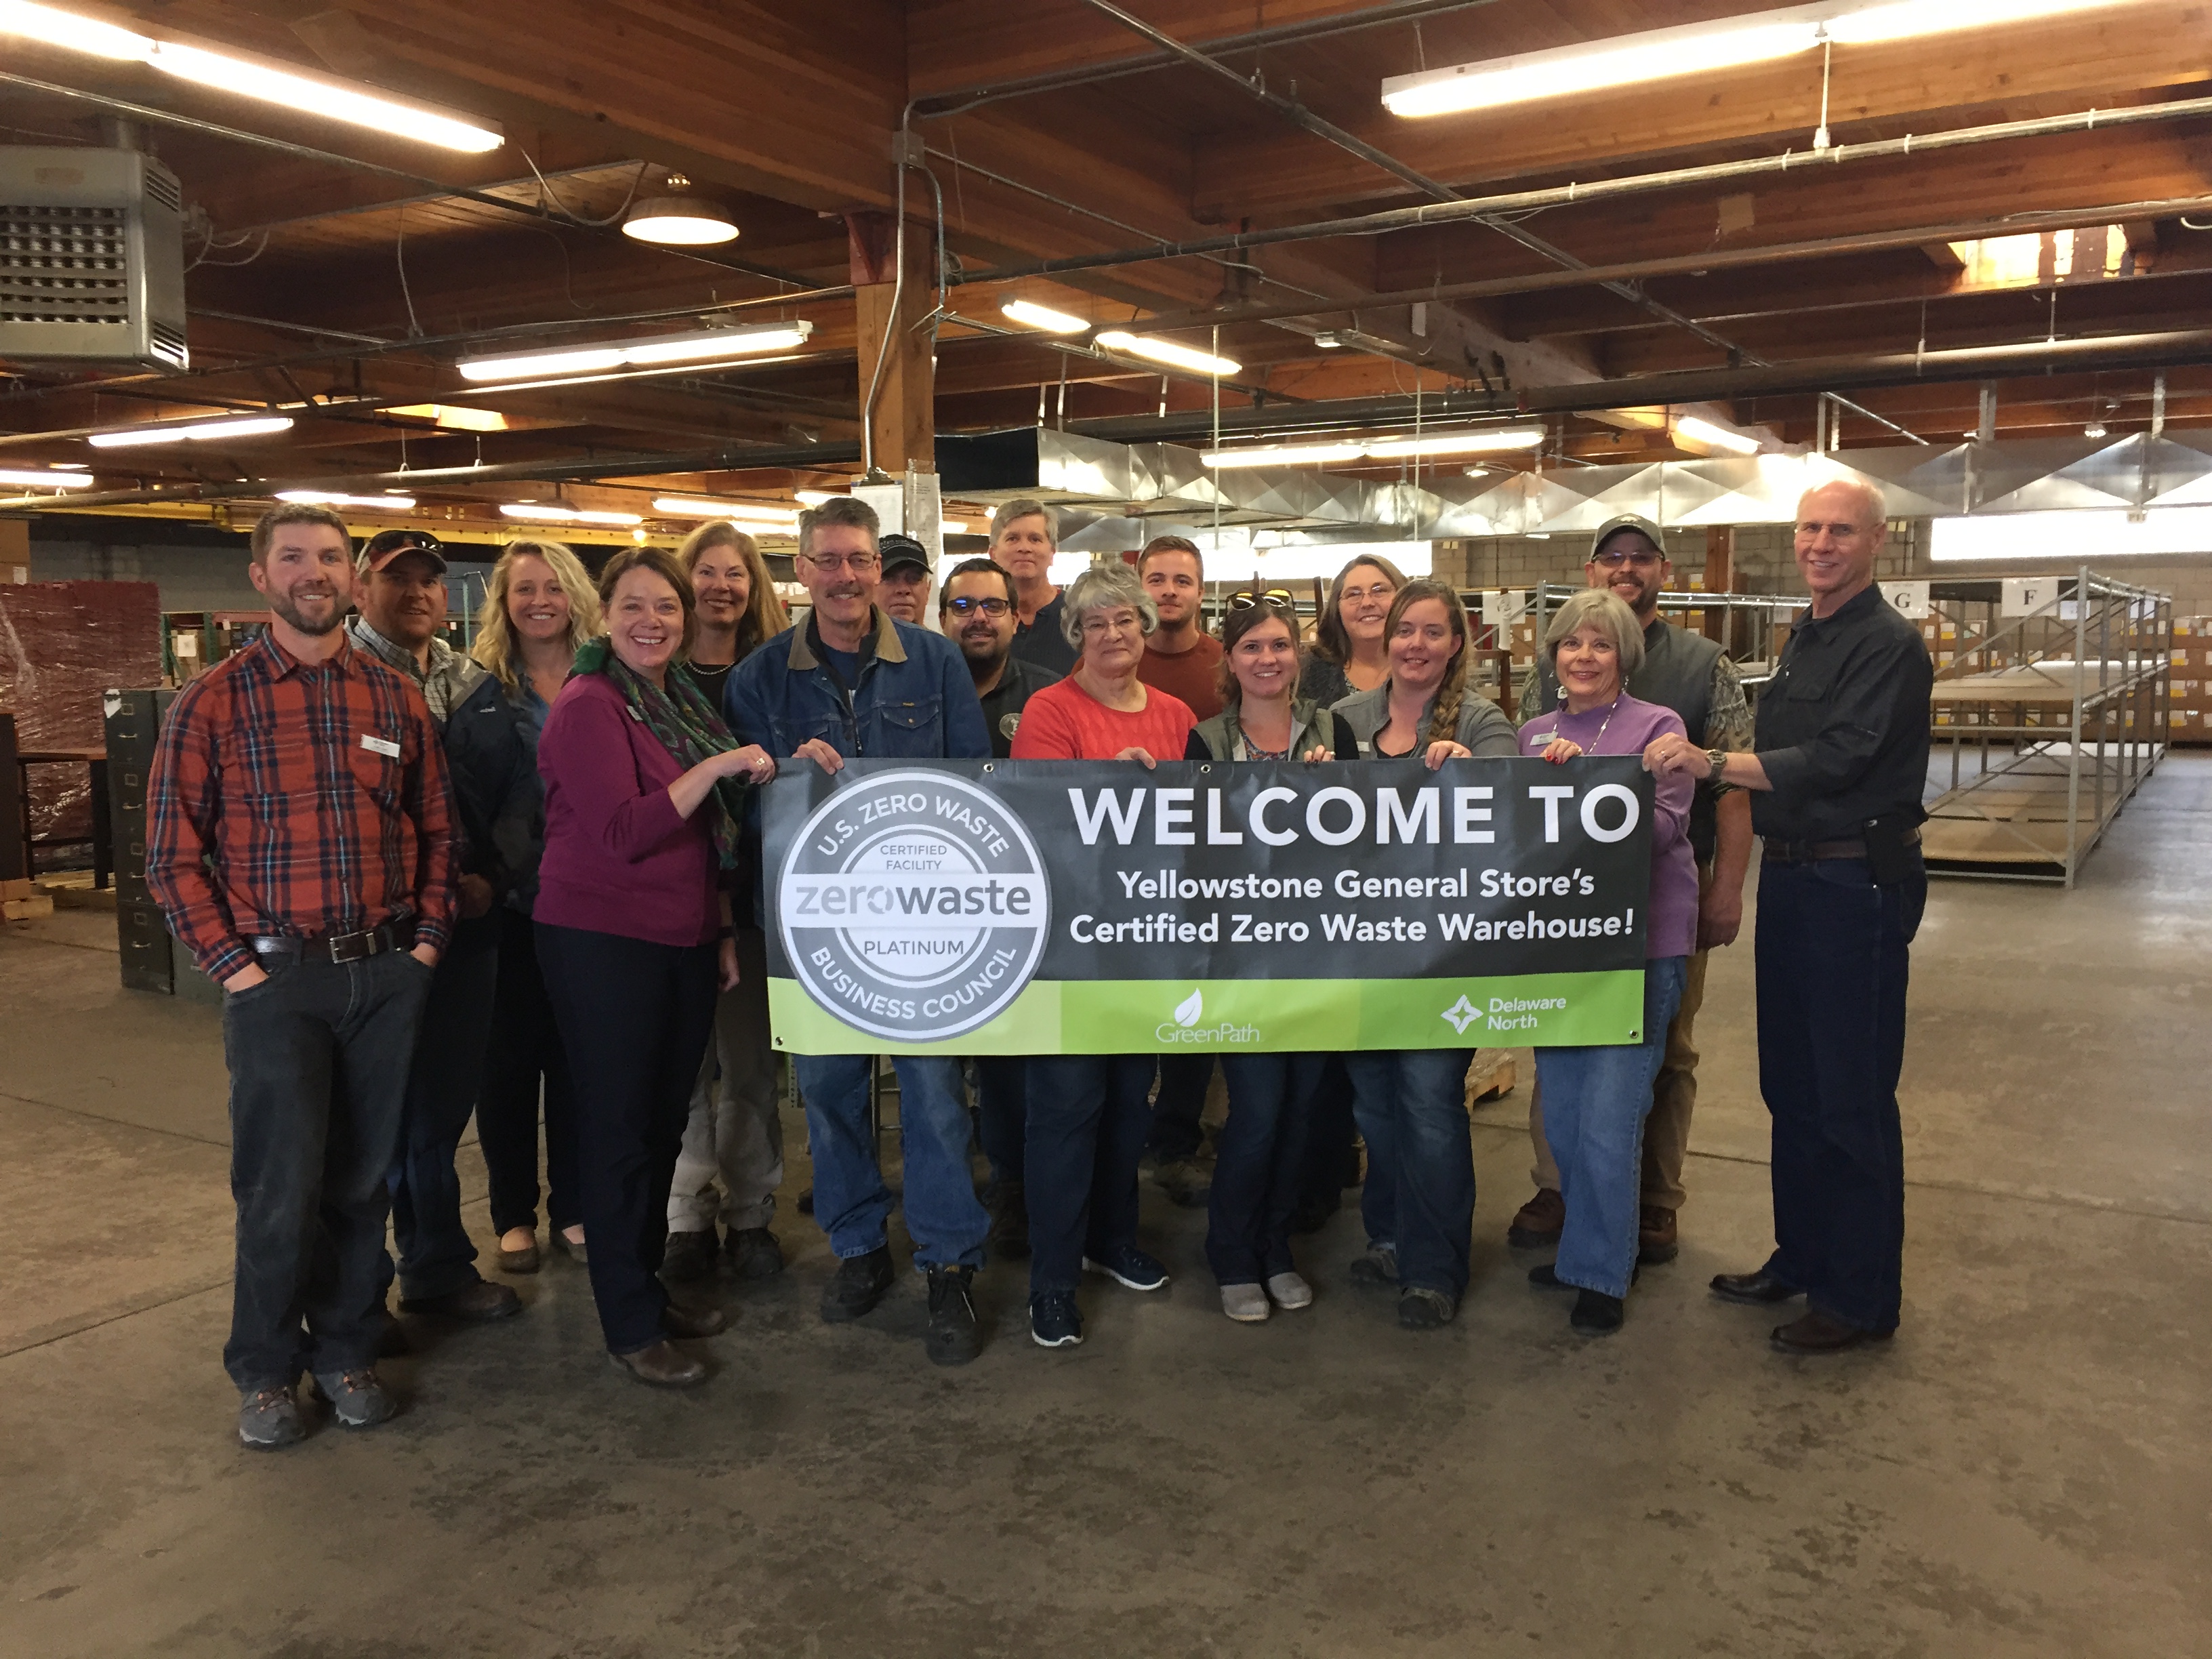 Delaware North's Yellowstone General Stores warehouse awarded Zero Waste Certificate by the U.S. Zero Waste Business Council